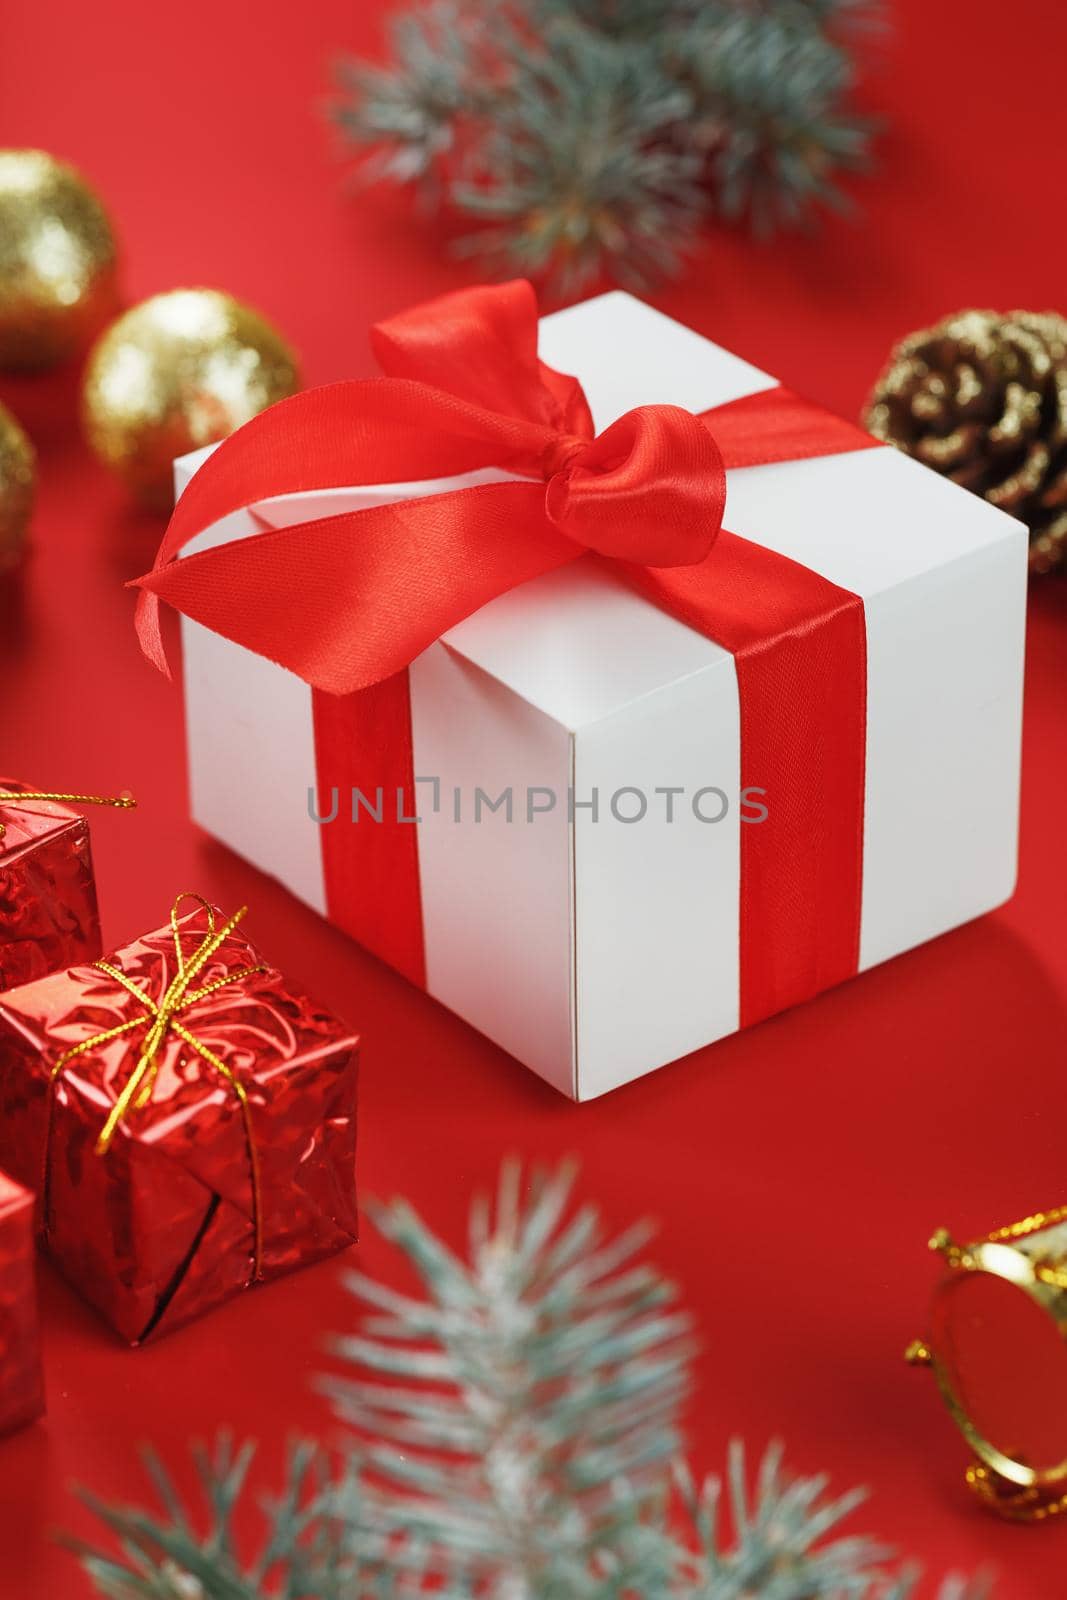 Box with a red bow around Christmas decorations on a red background. Close-up